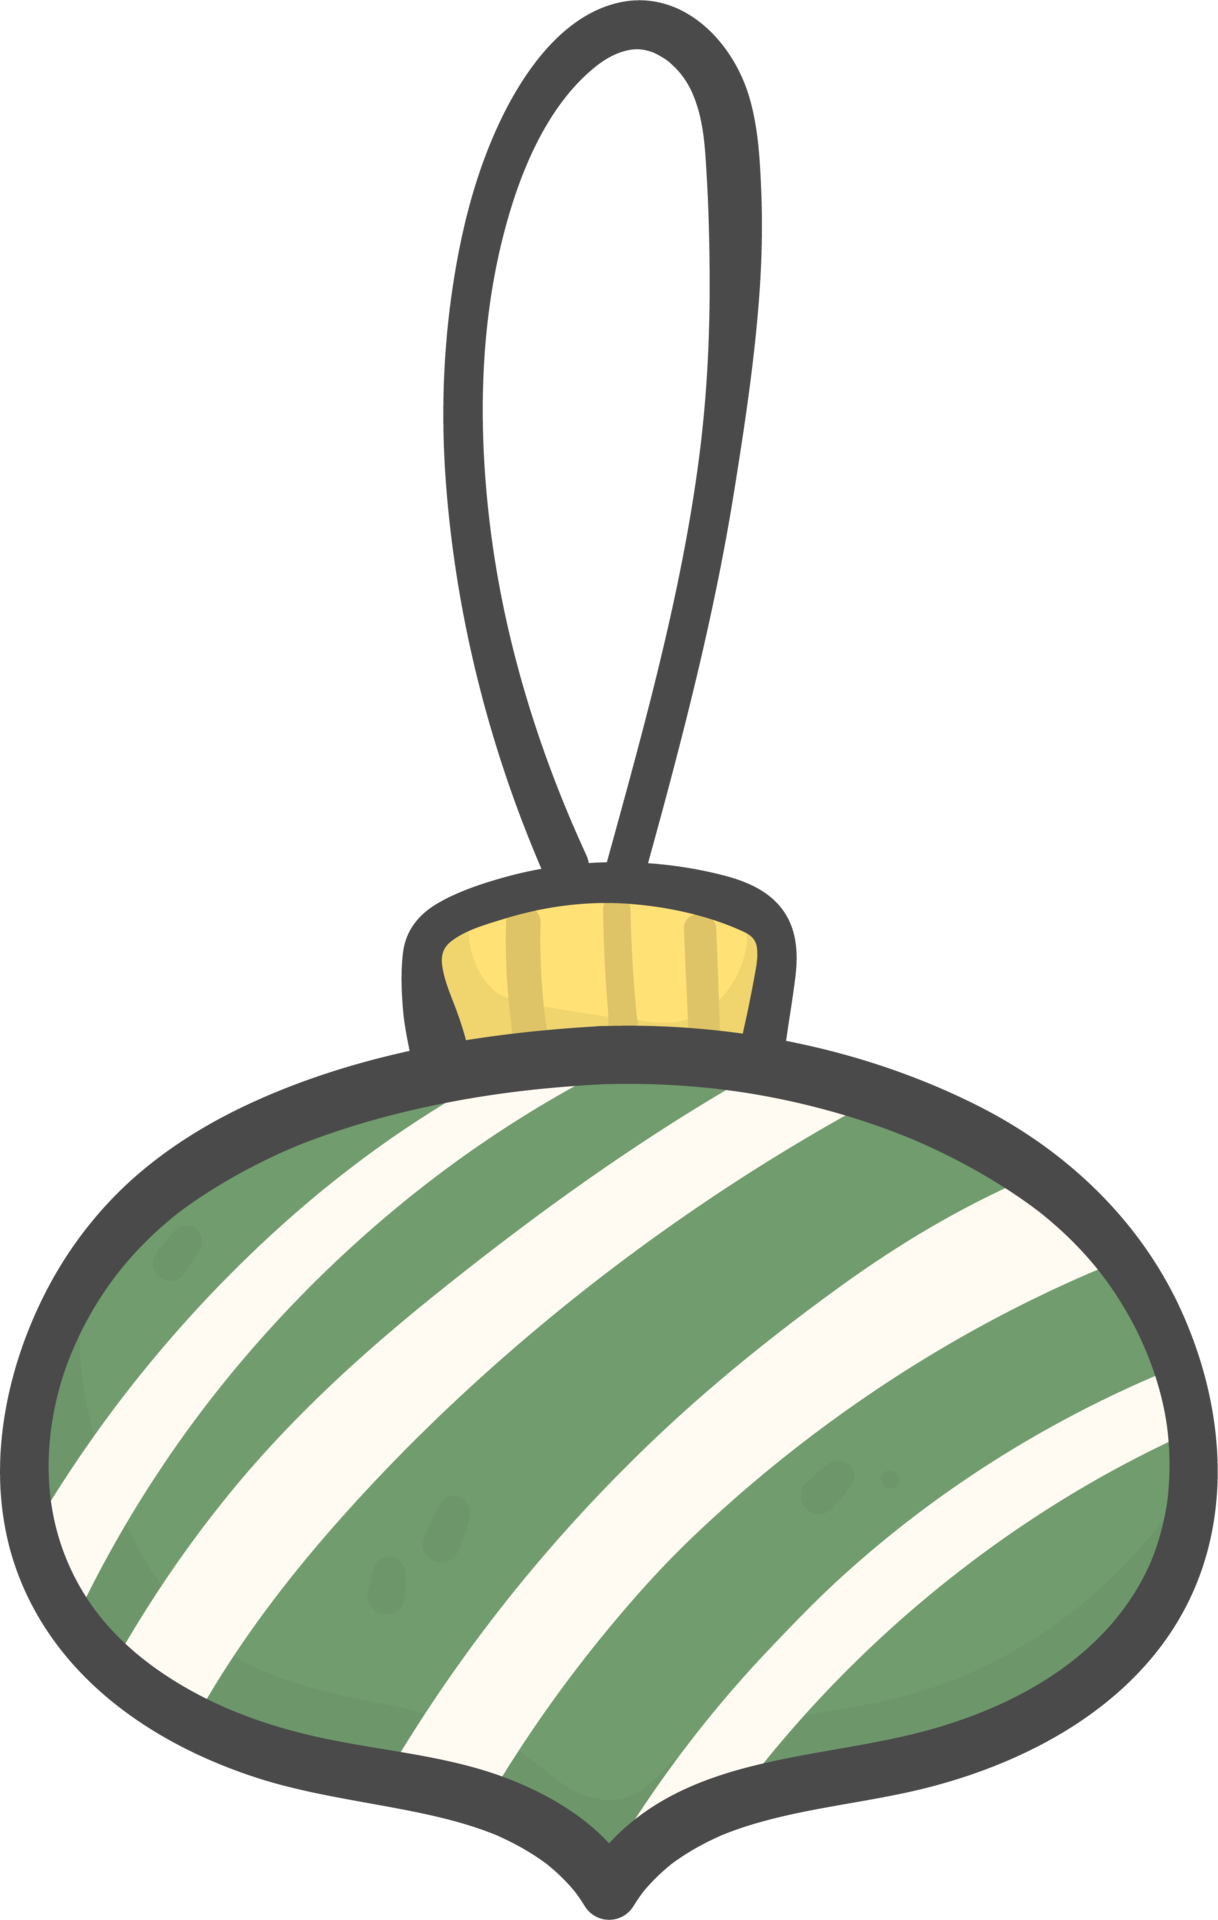 https://static.vecteezy.com/system/resources/previews/013/929/136/original/cute-christmas-bauble-ornament-ball-decoration-cartoon-doodle-hand-drawing-png.png